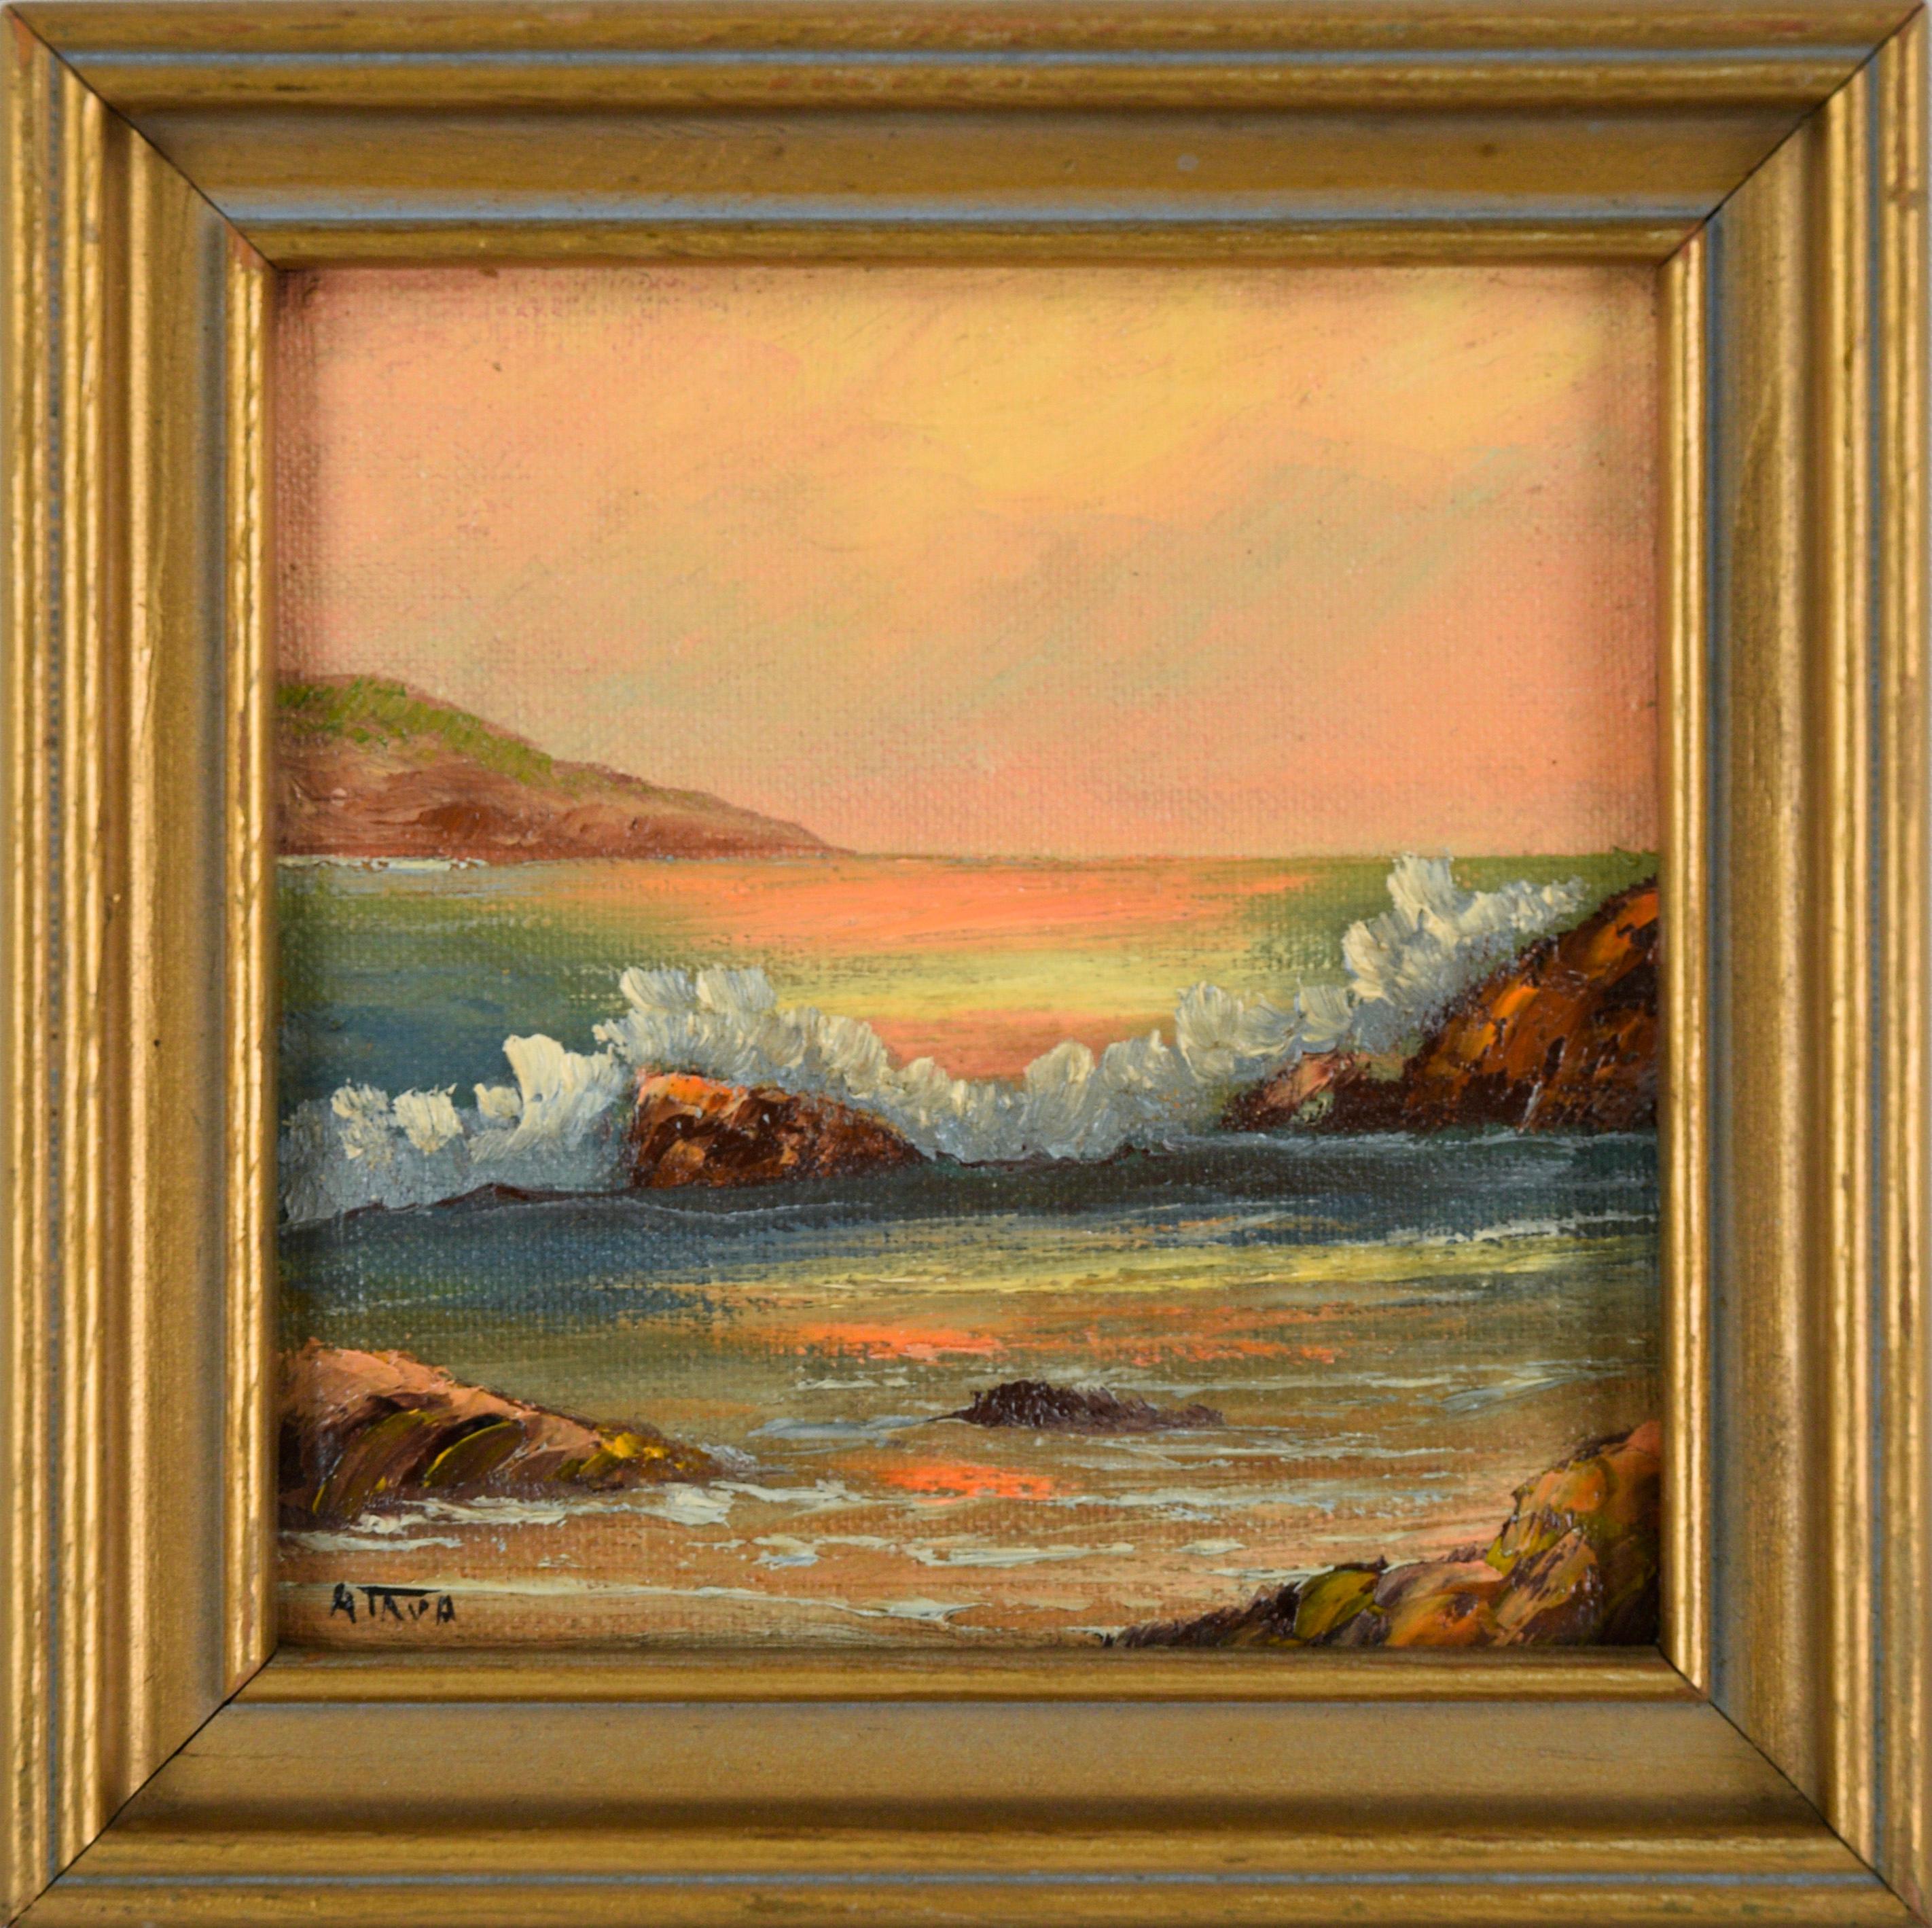 Unknown Landscape Painting - Sunset Seascape - Small Plein Air Oil Painting on Canvas